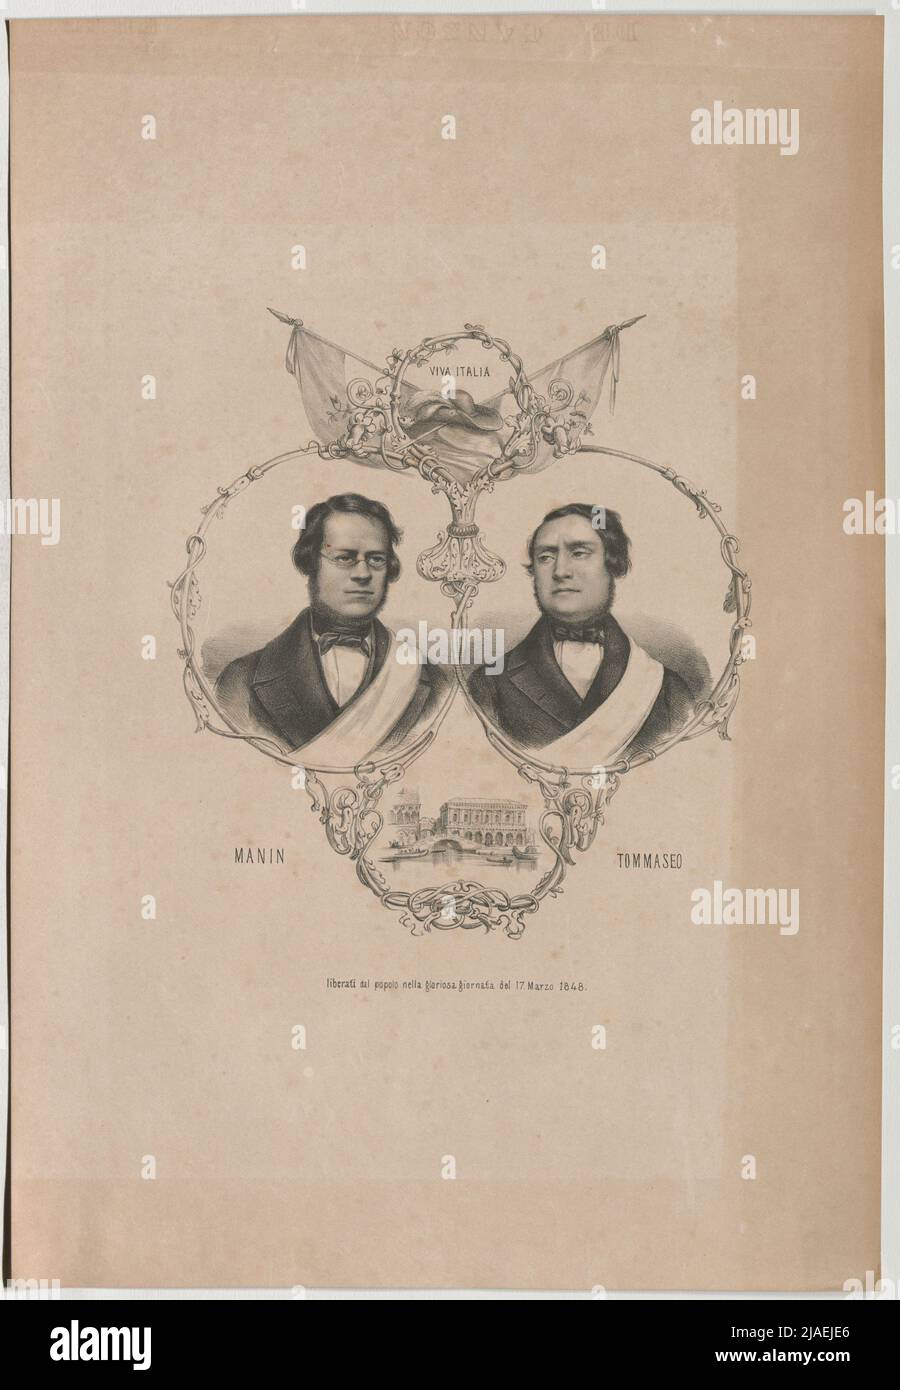 Manin / Tommaseo freed from the people on the glorious day 17. March 1848 '. Niccolò Tommaseo und Daniele Manin. Unknown Stock Photo